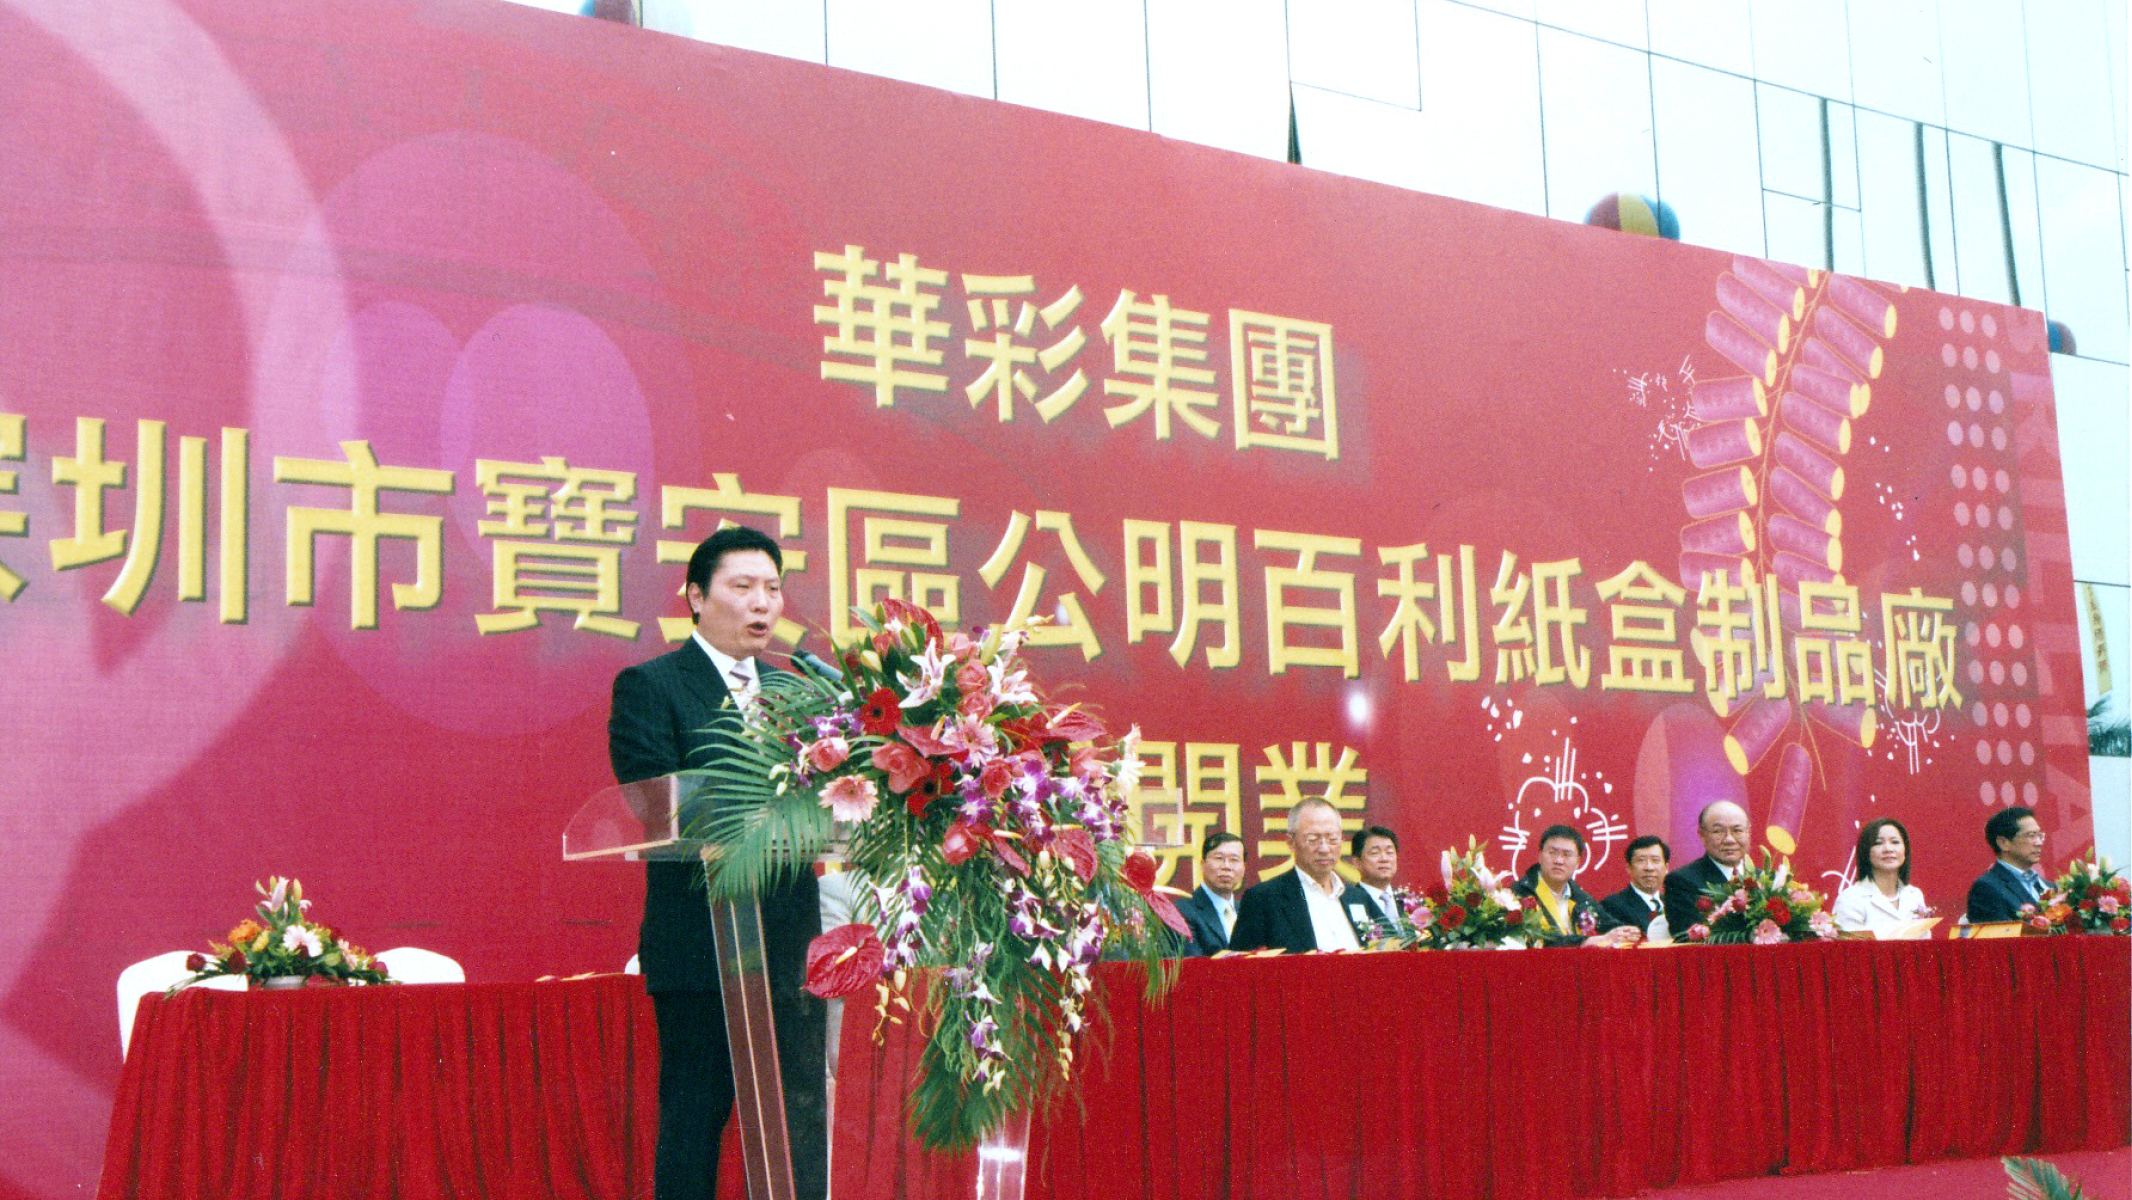 (Right) PolyU conferred the University fellowship upon Dr Shi in recognition of his significant contributions to the community. (Left) Dr Shi moved the major production facility of his printing company to the Mainland in the late 1980s, with the opening of a factory in Shenzhen.